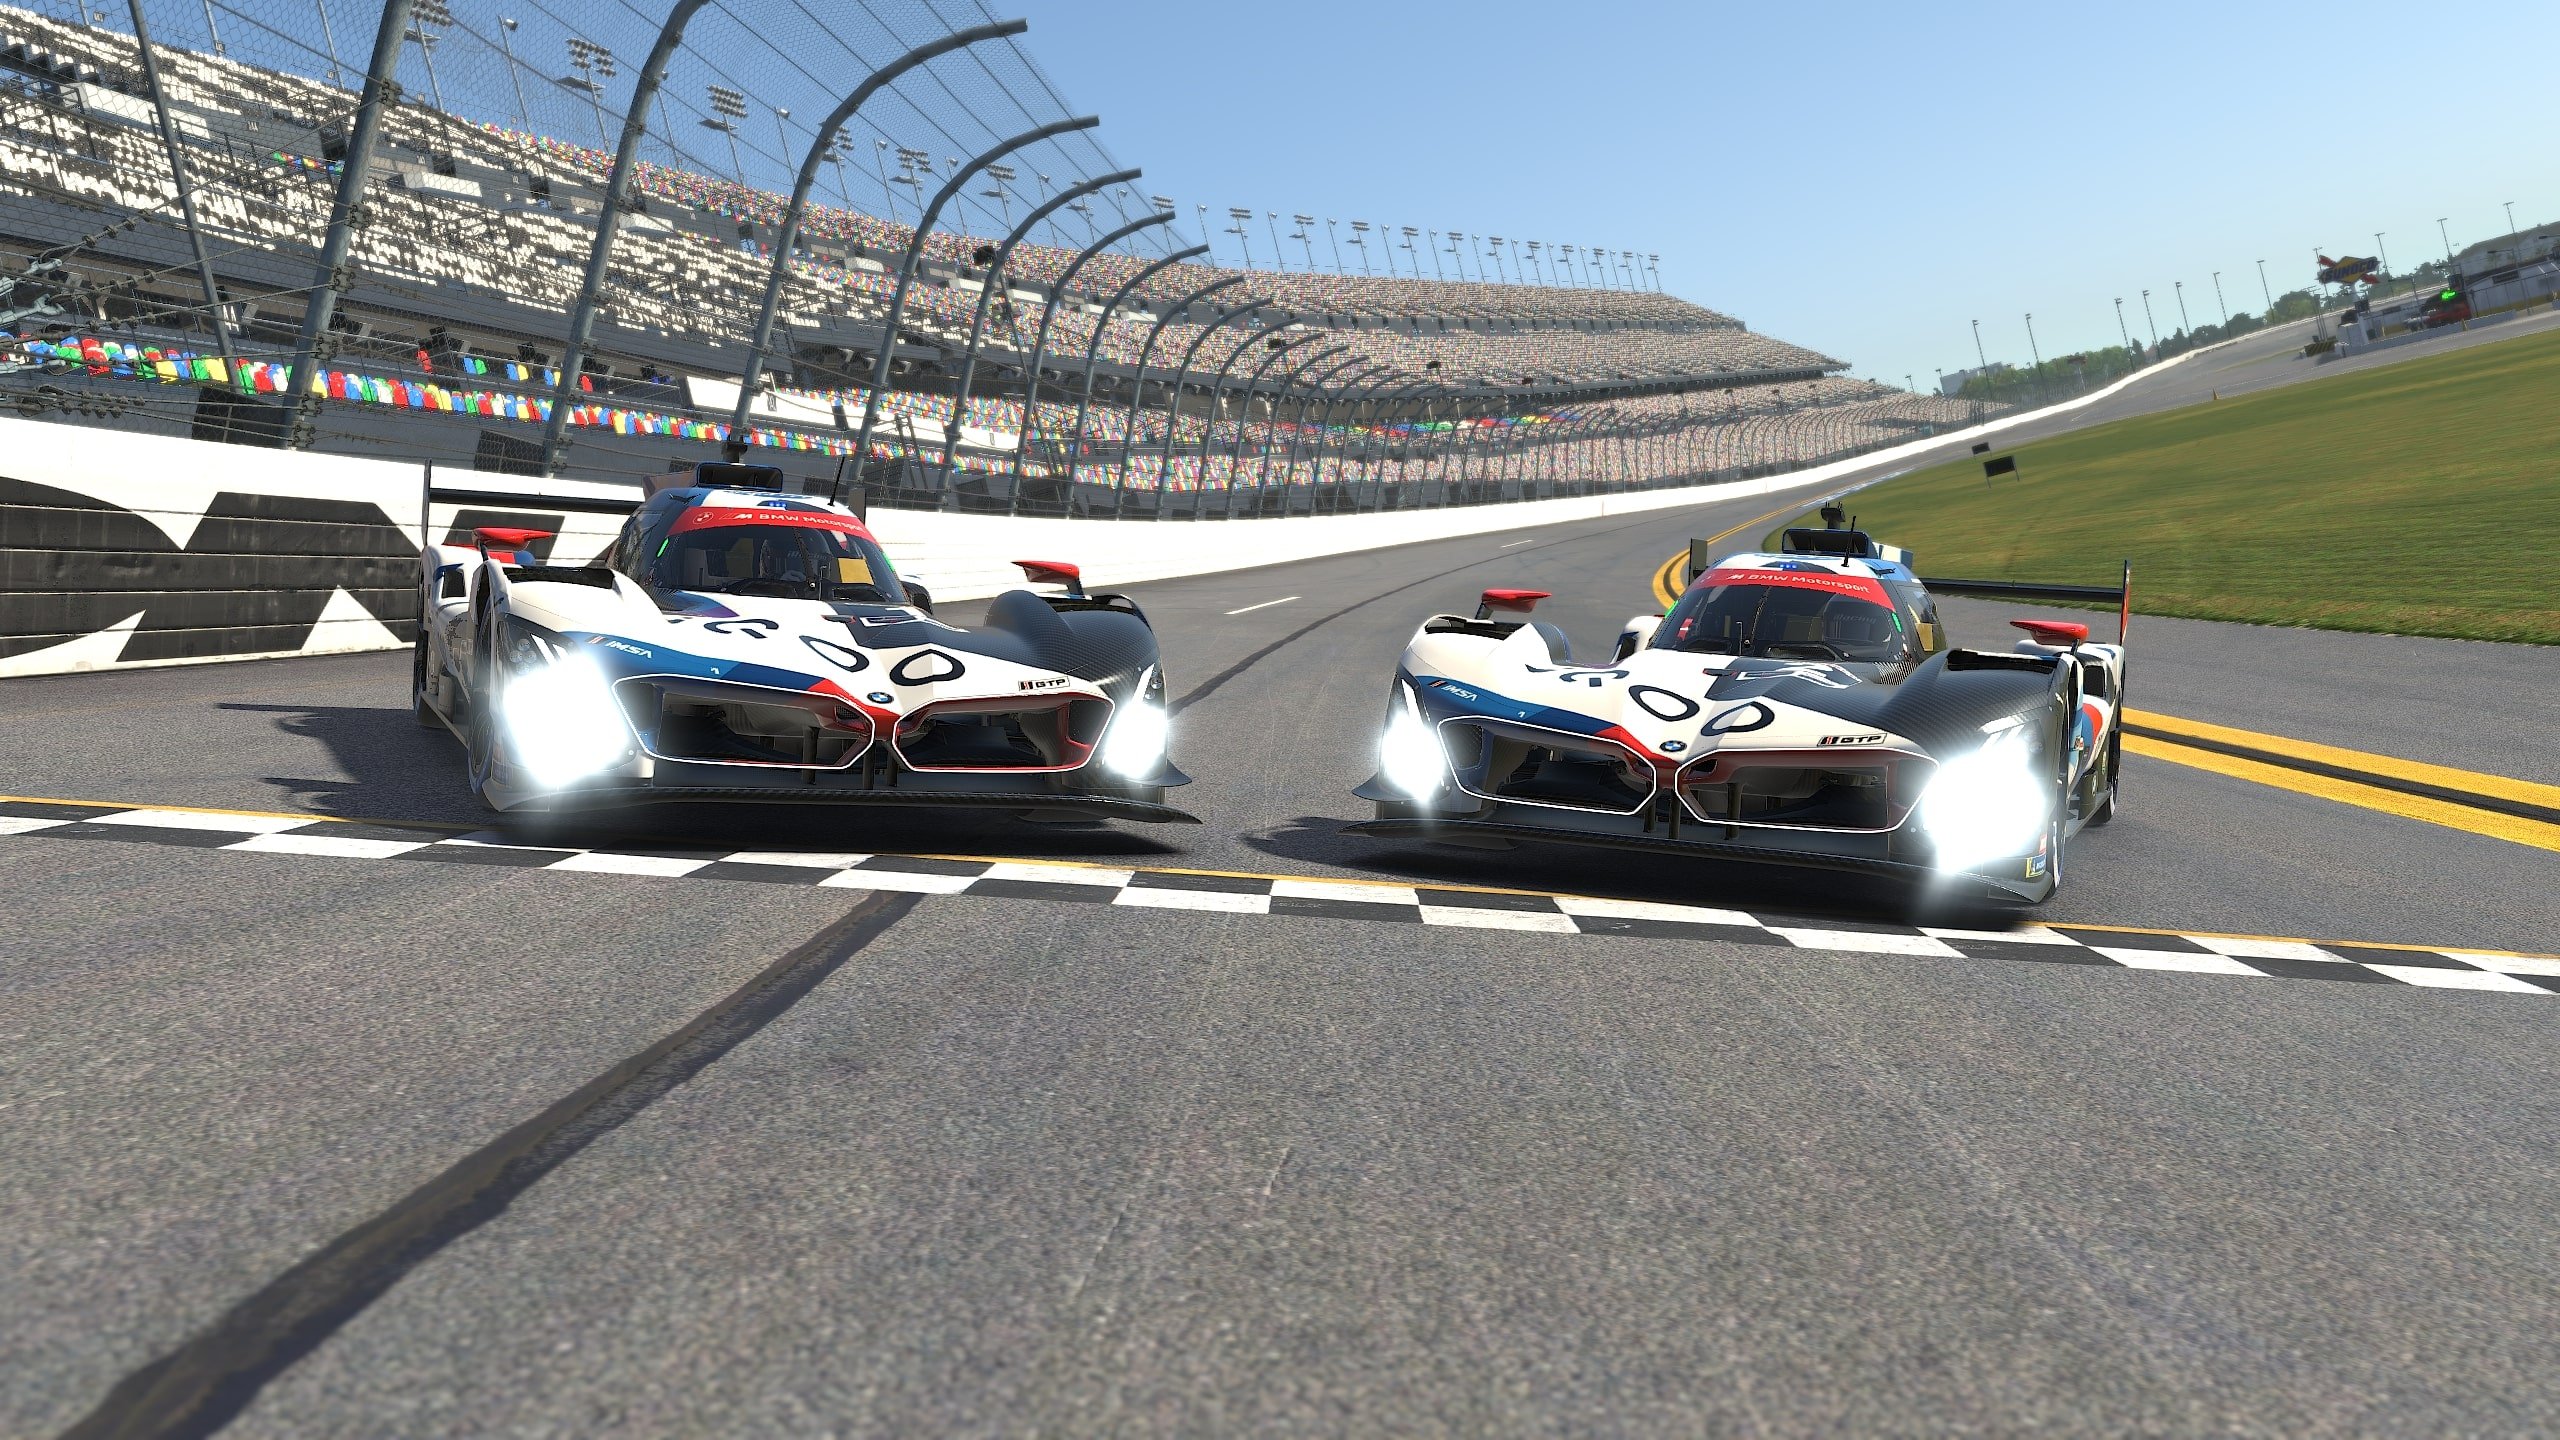 iRacing hit by cyber attack as DDoS brings the game to a halt